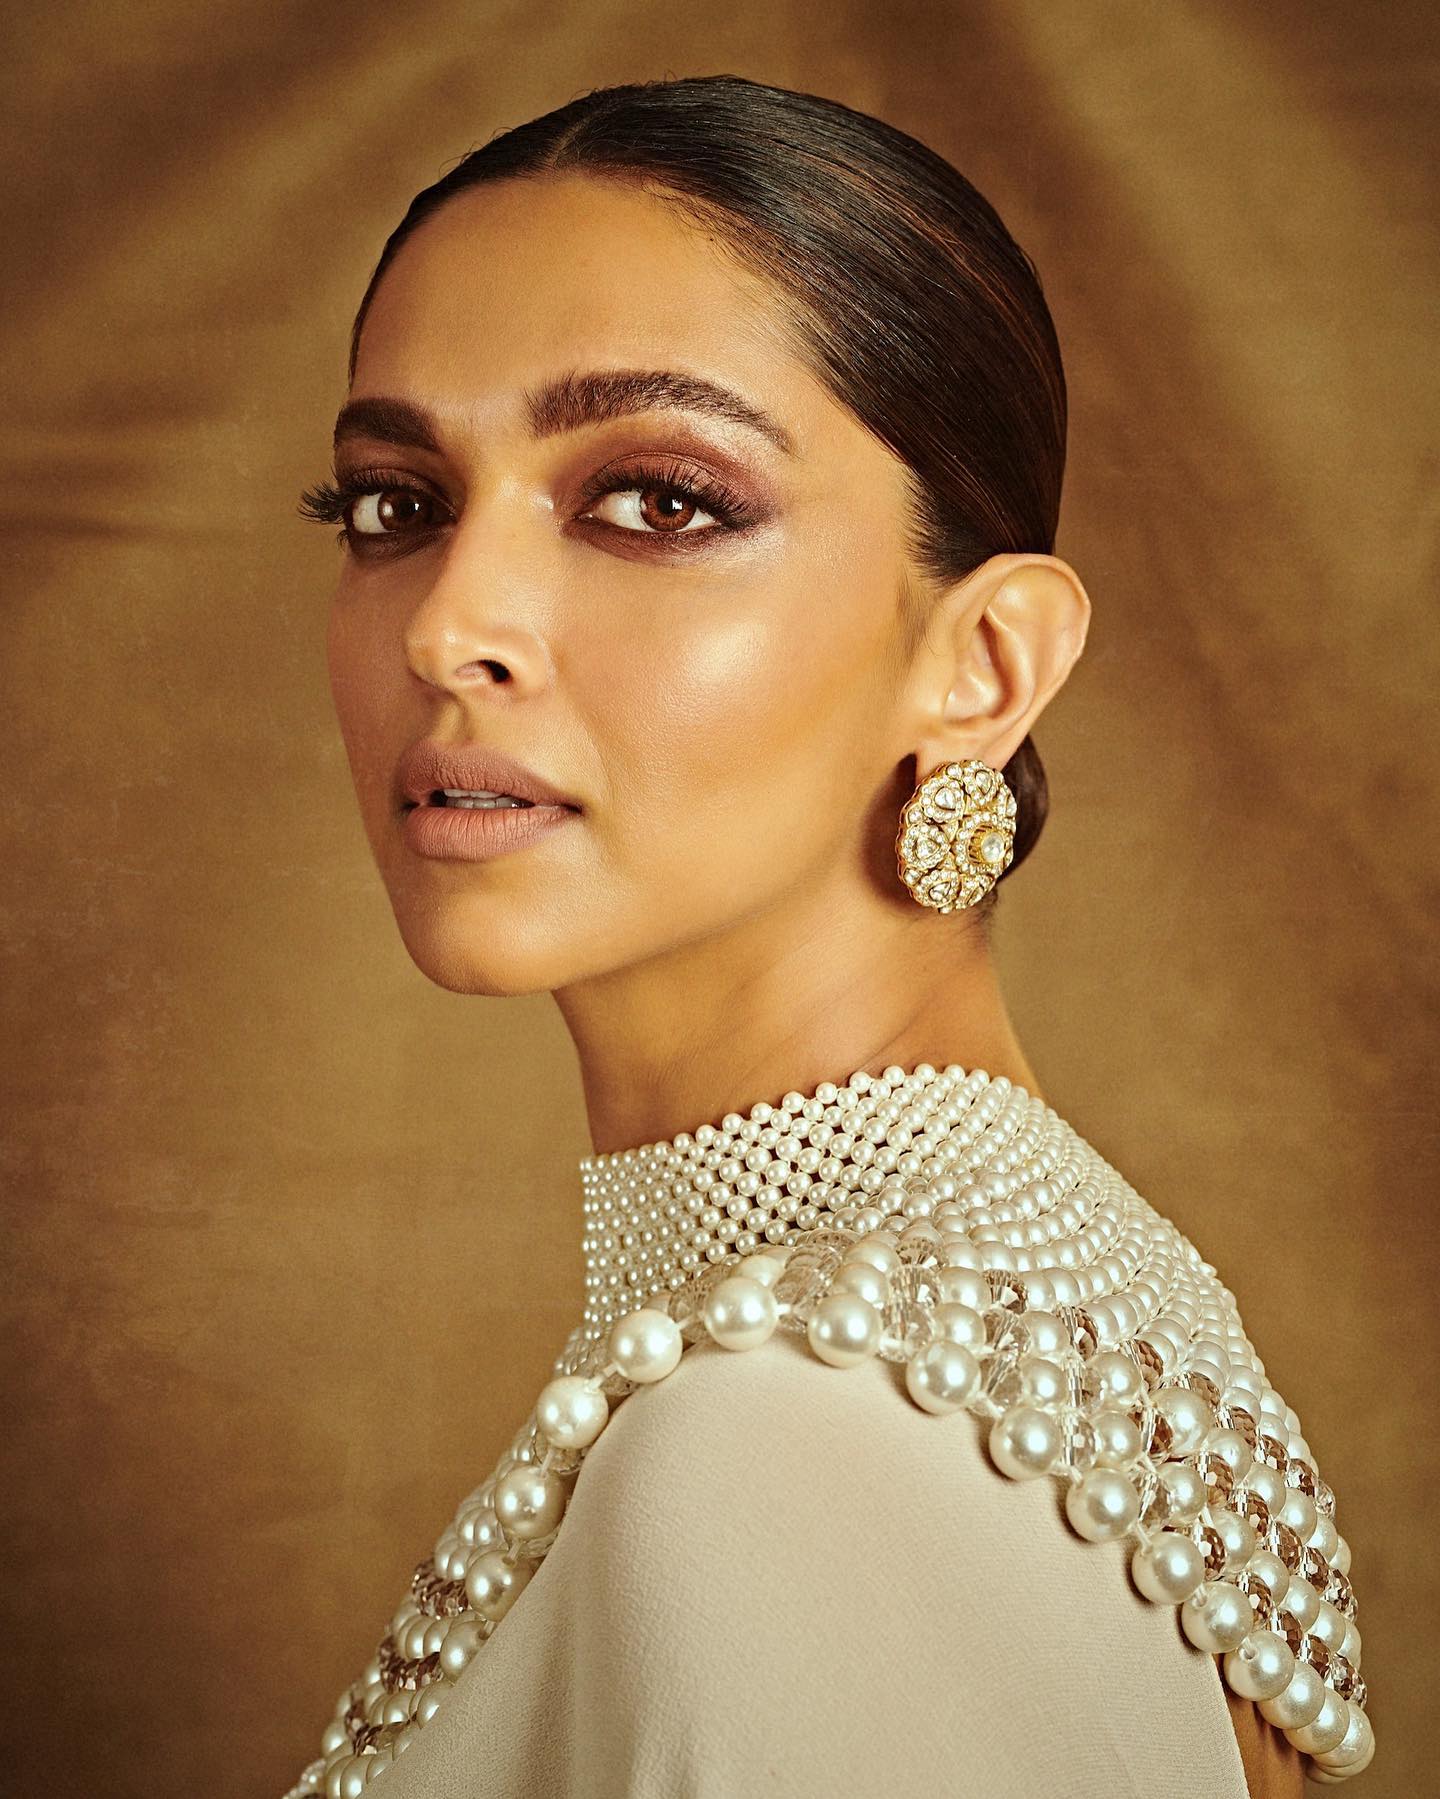 Deepika Padukone seen in Pearl Necklace and Saree at Cannes 2022 Photoshoot 4